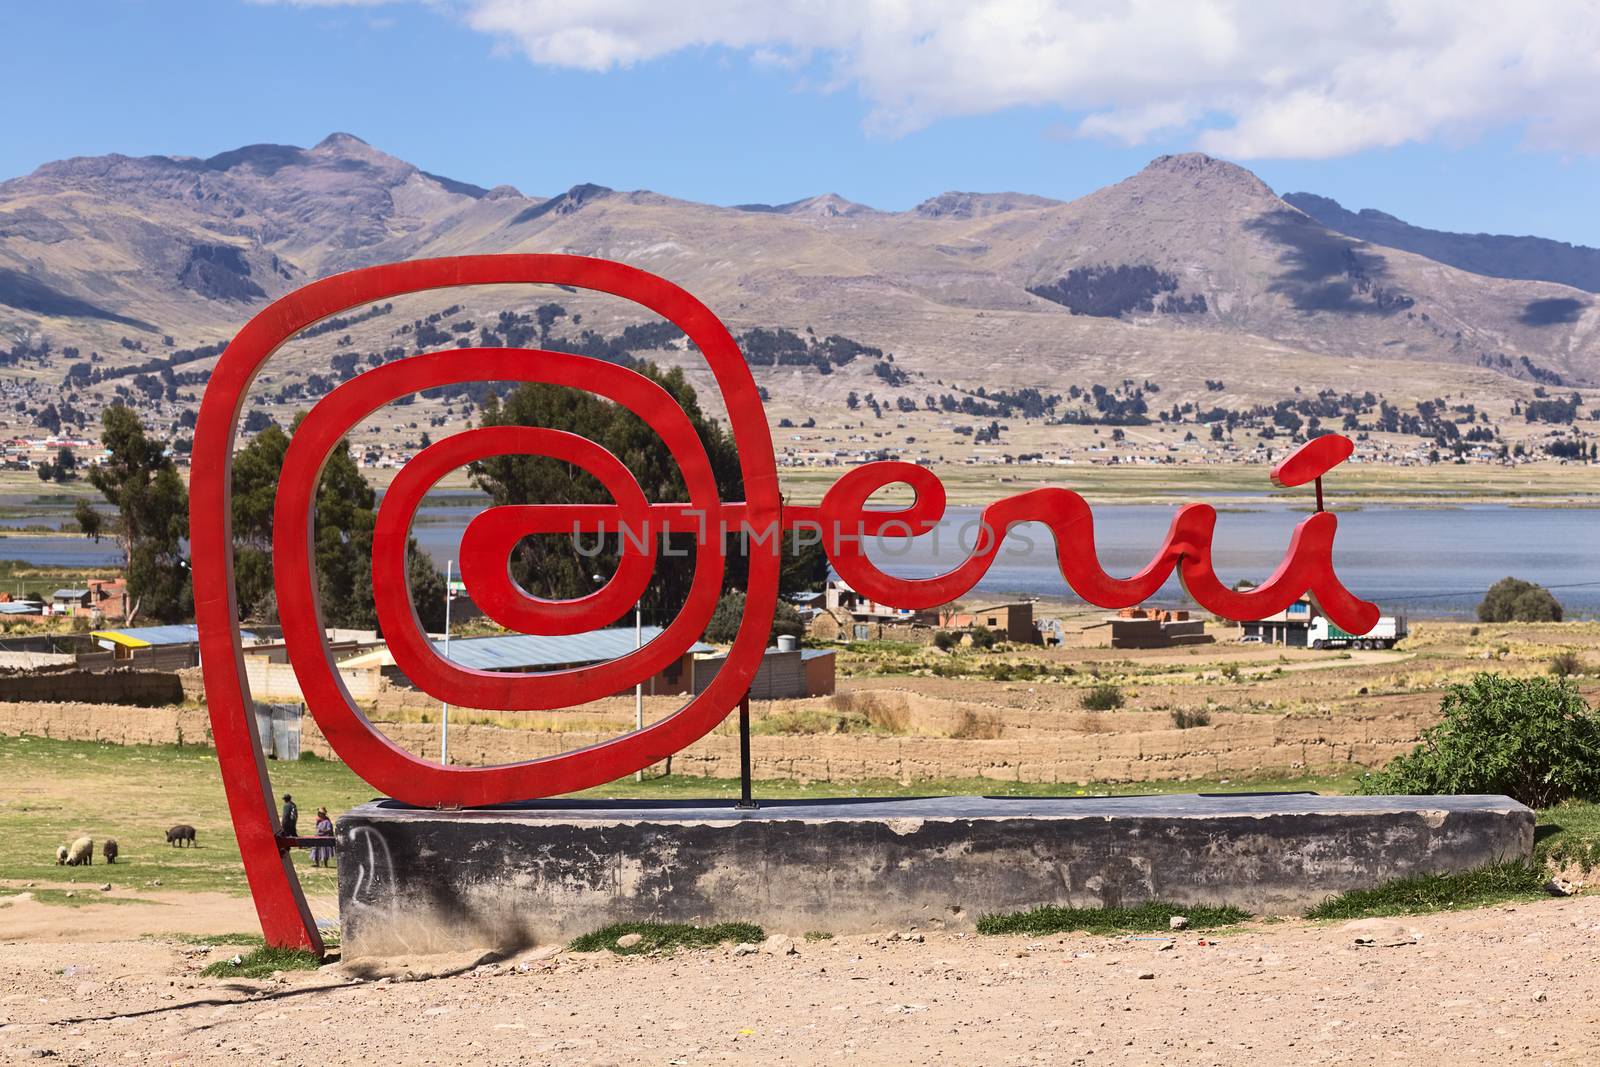 YUNGUYO, PERU - OCTOBER 10, 2014: Red Peru sign along the road close to the border between Bolivia and Peru with view onto Lake Titicaca in the back on October 10, 2014 in Yunguyo, Peru